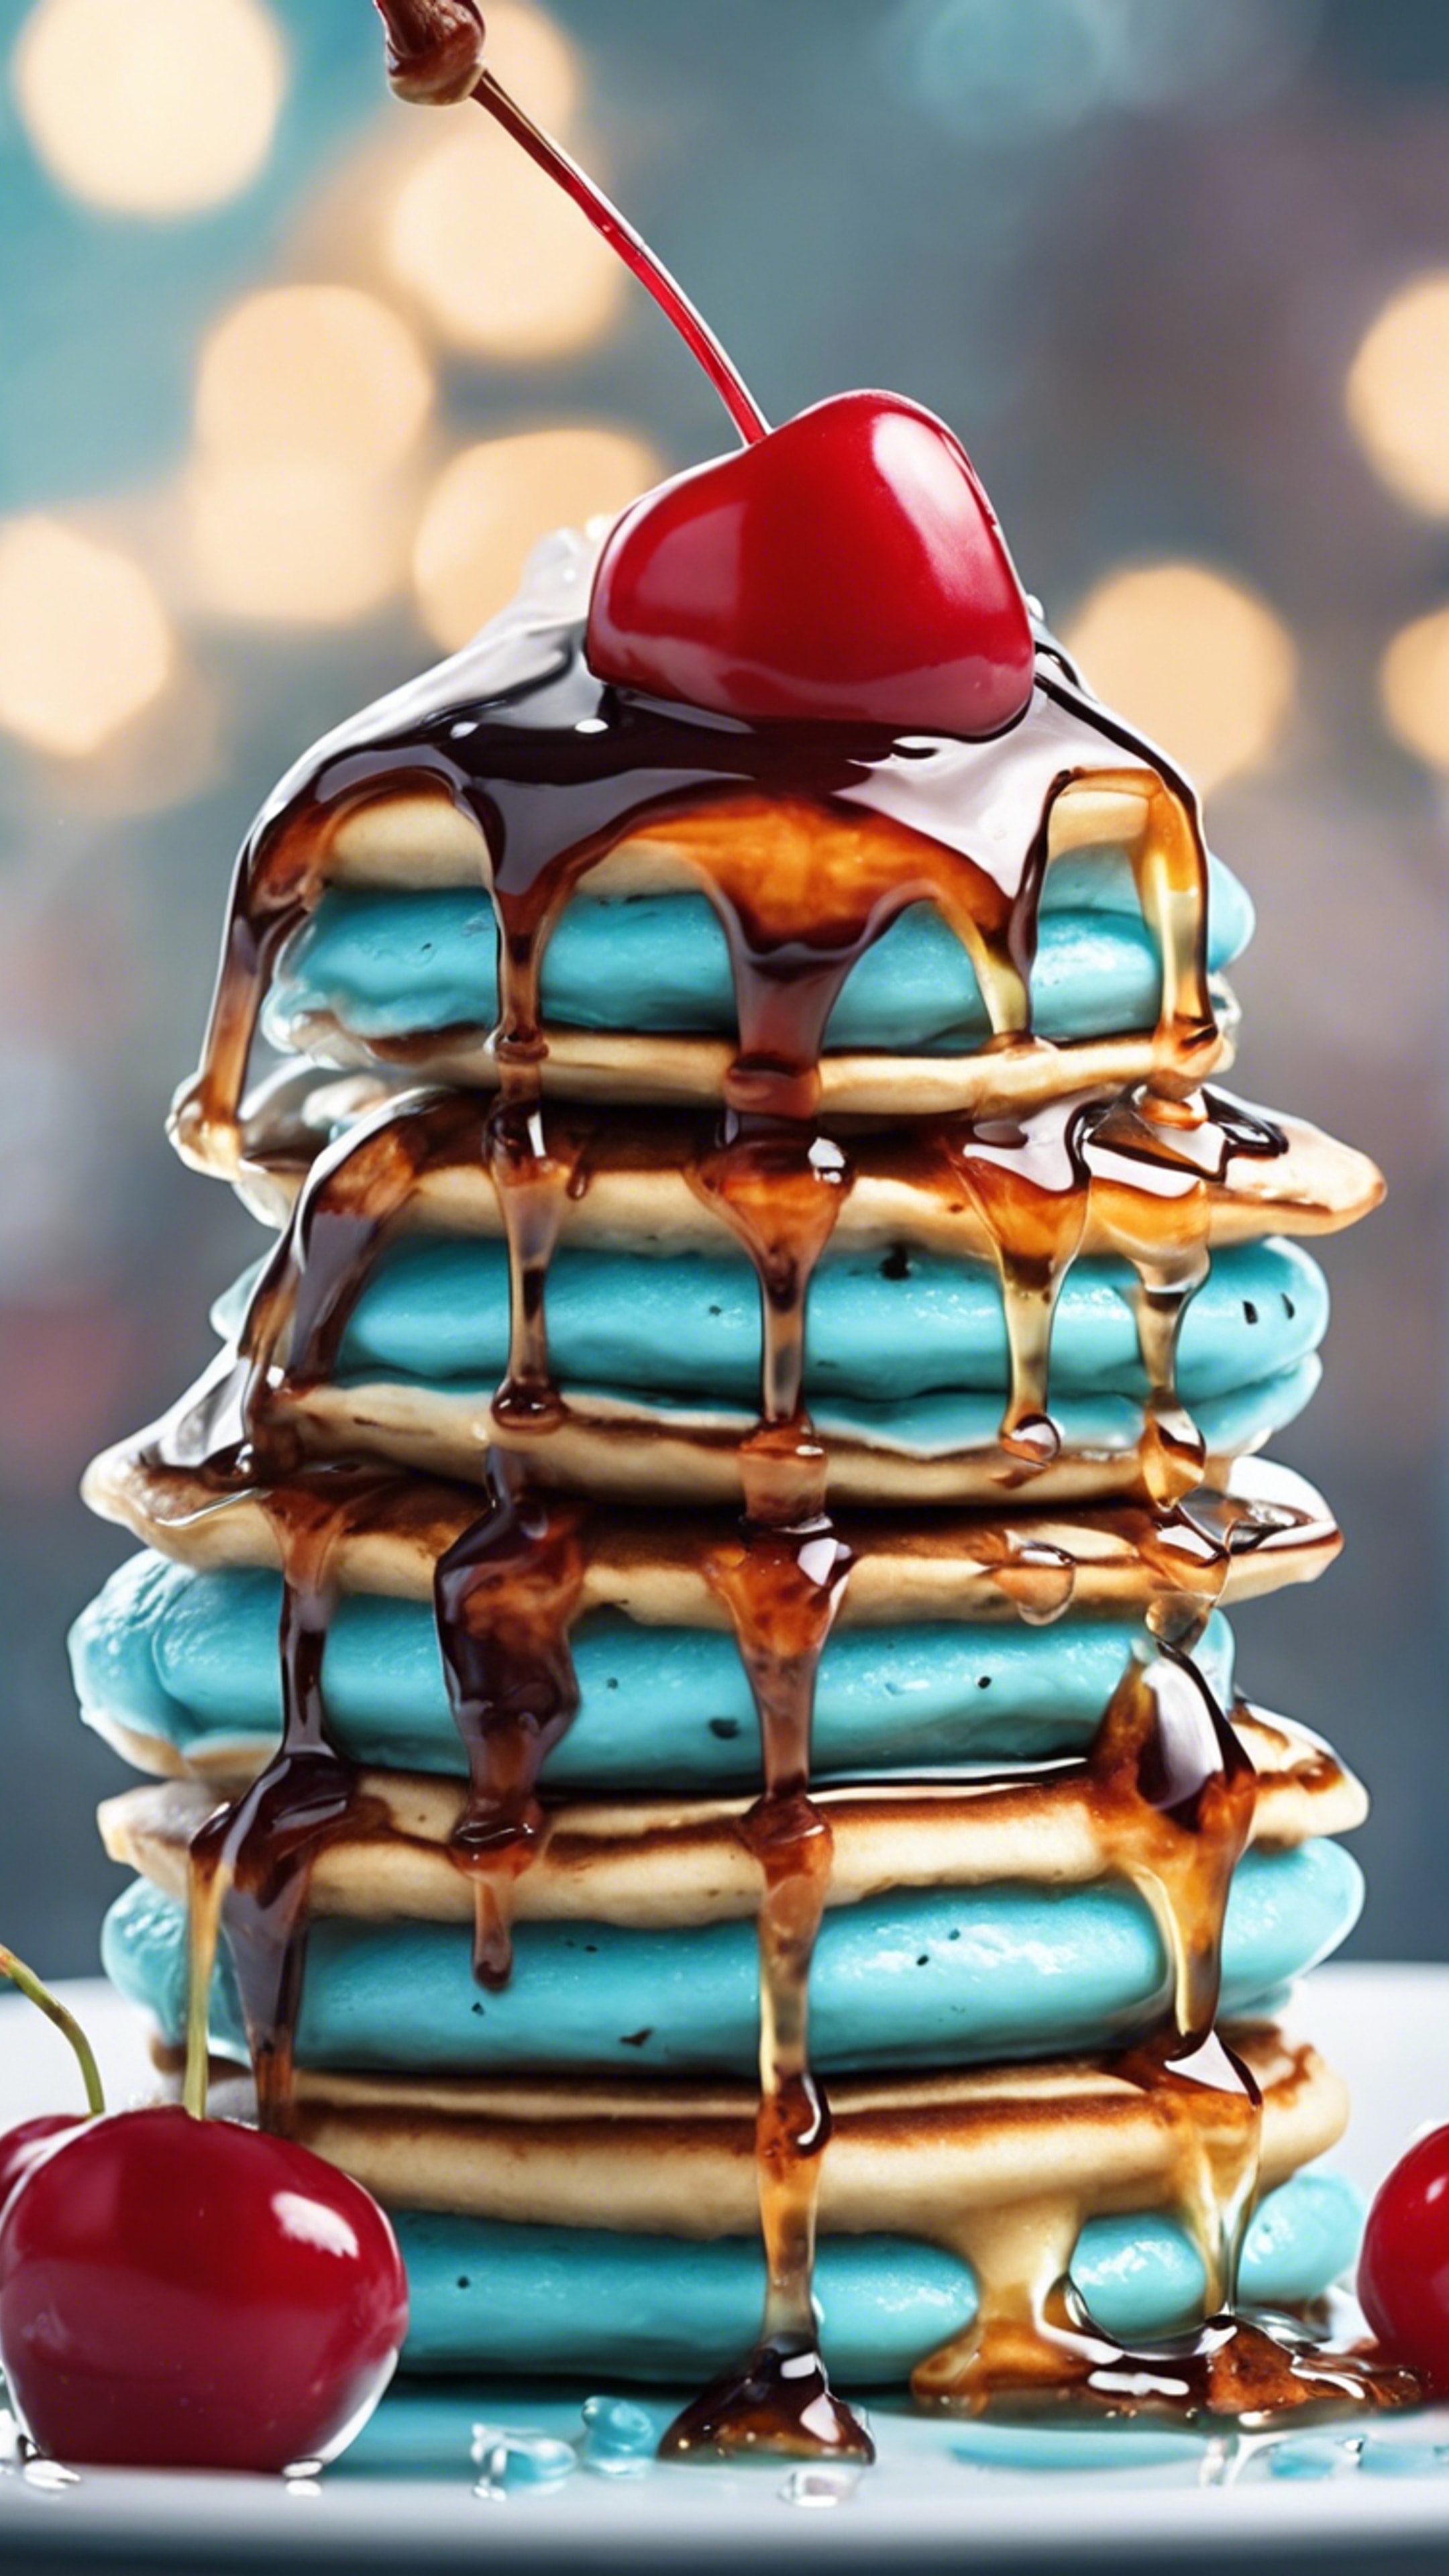 A stack of kawaii light blue pancakes dripping with syrup and a cherry on top. Hình nền[05c3a9af3a95463c8379]